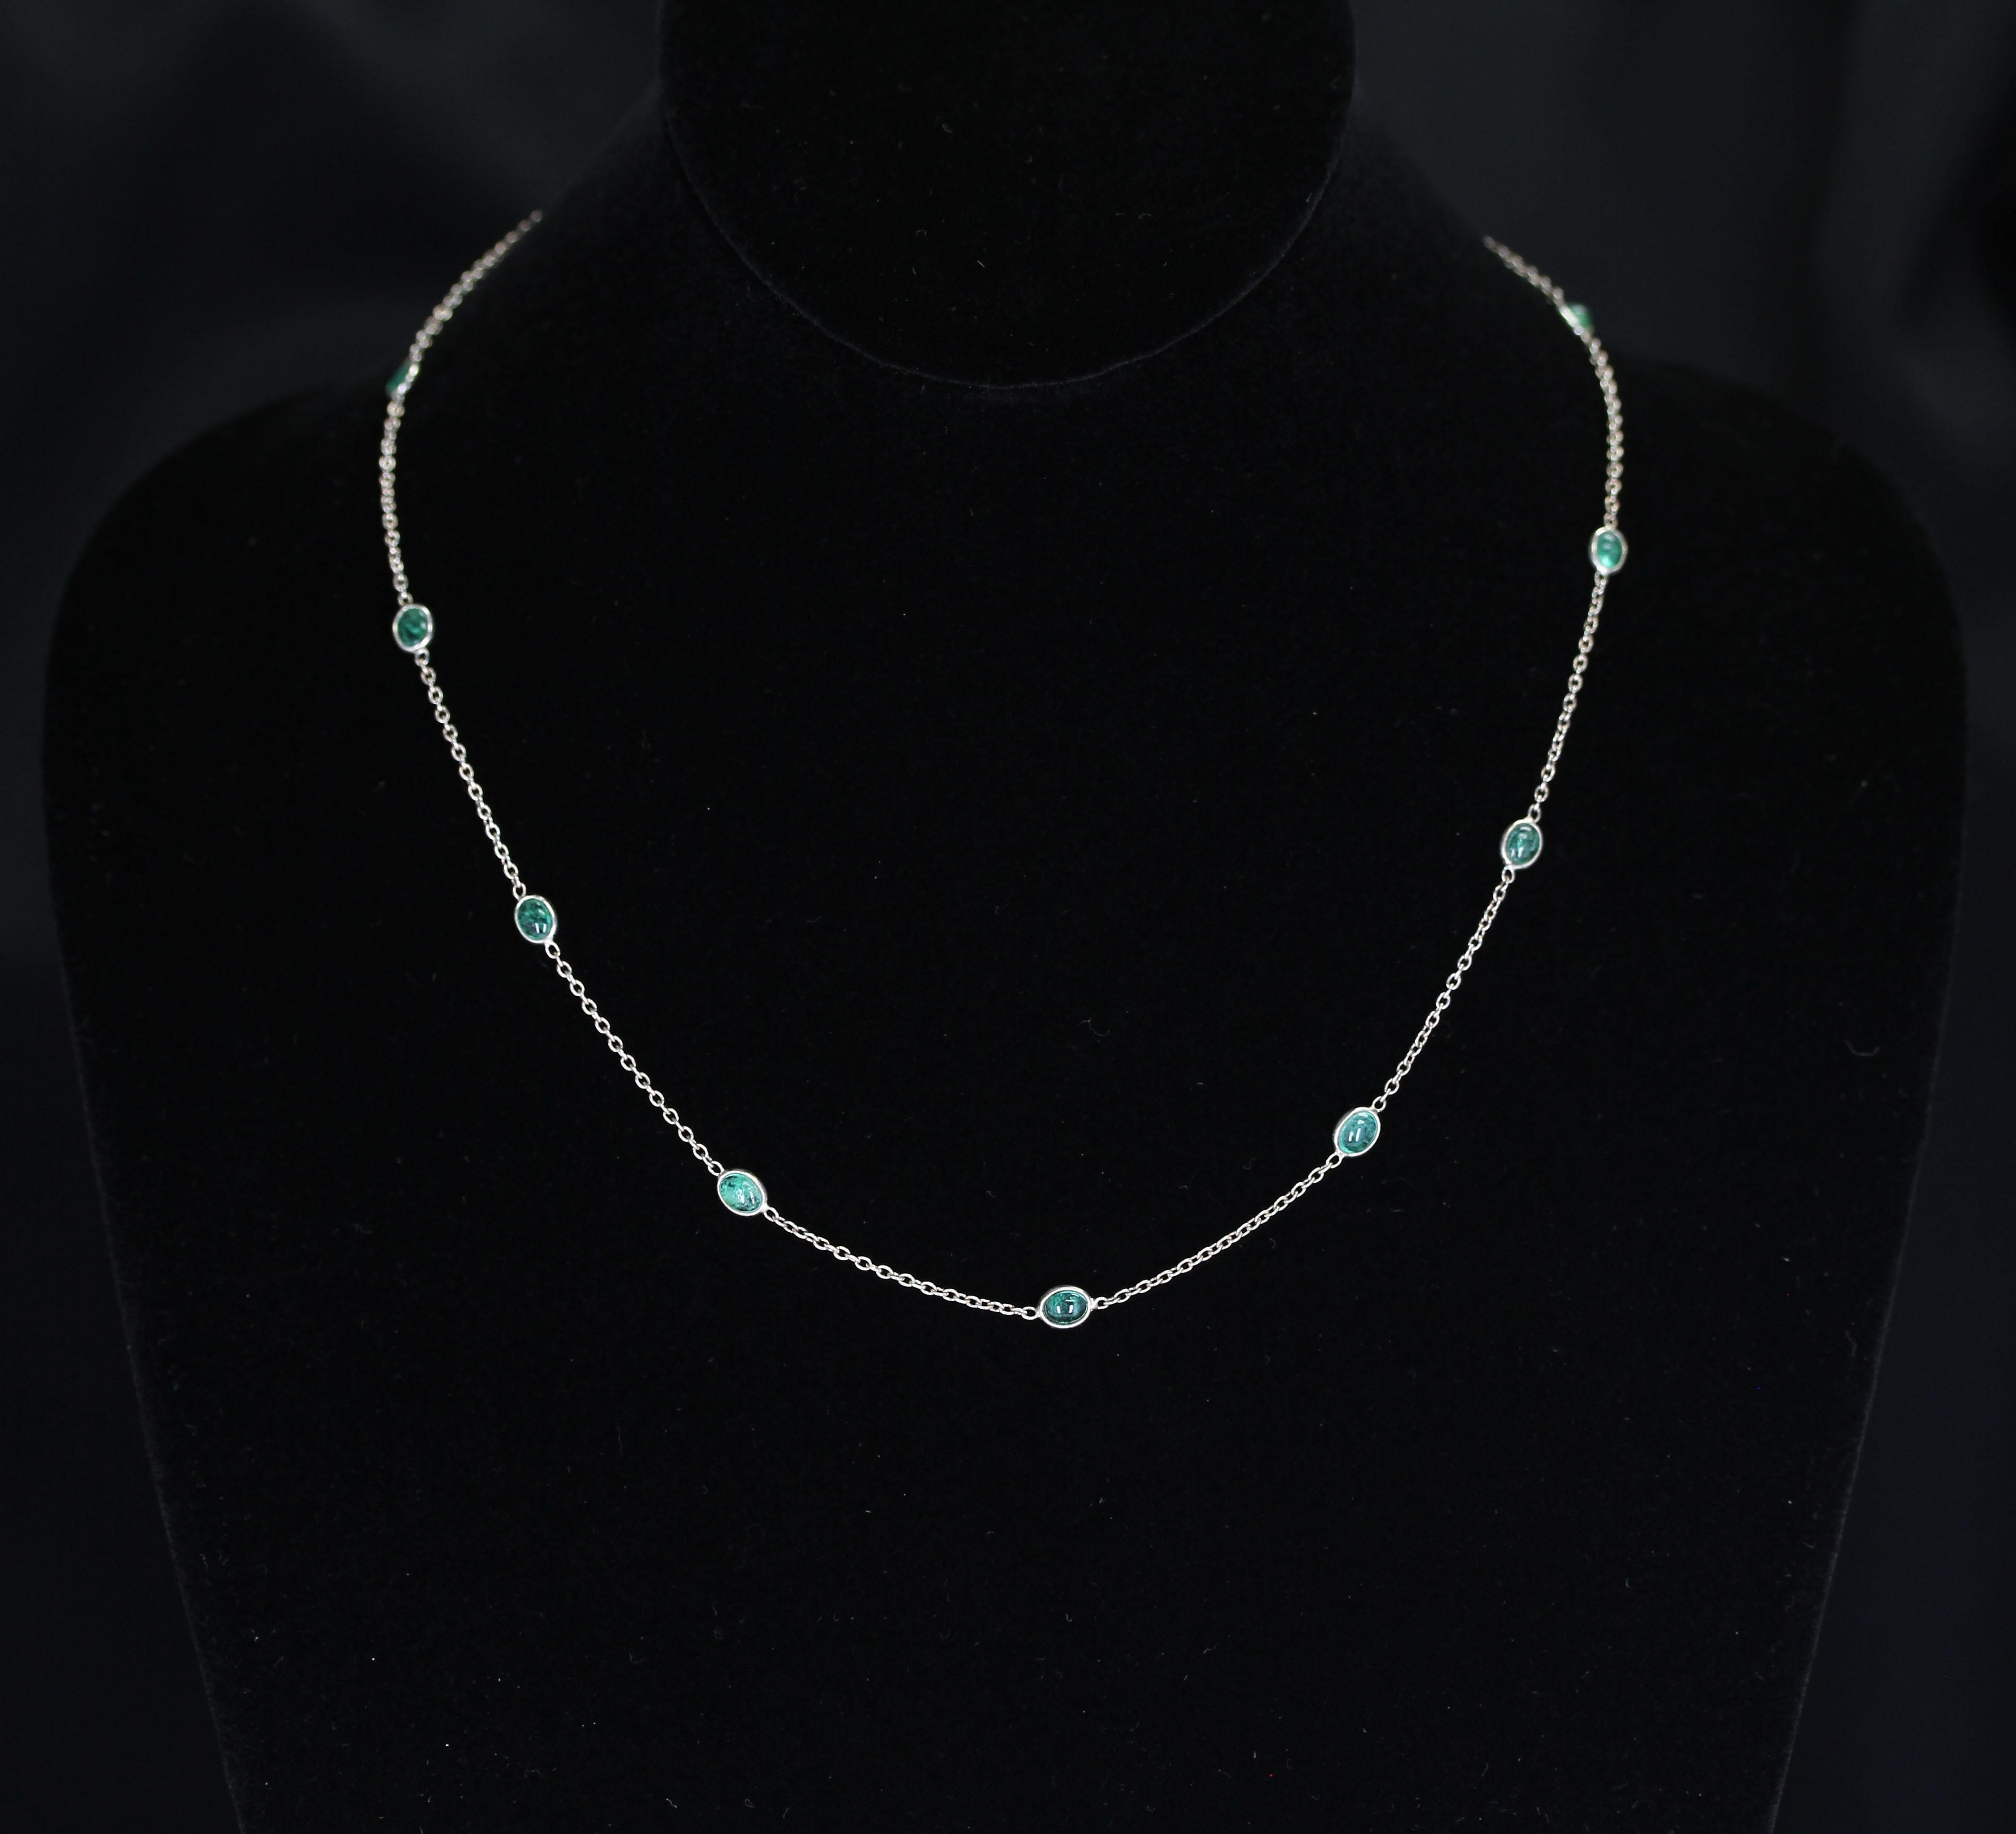 A dainty and everyday-wear Emerald cabochon necklace in silver. Weight: Approximately 15 carats. Length: 18” 